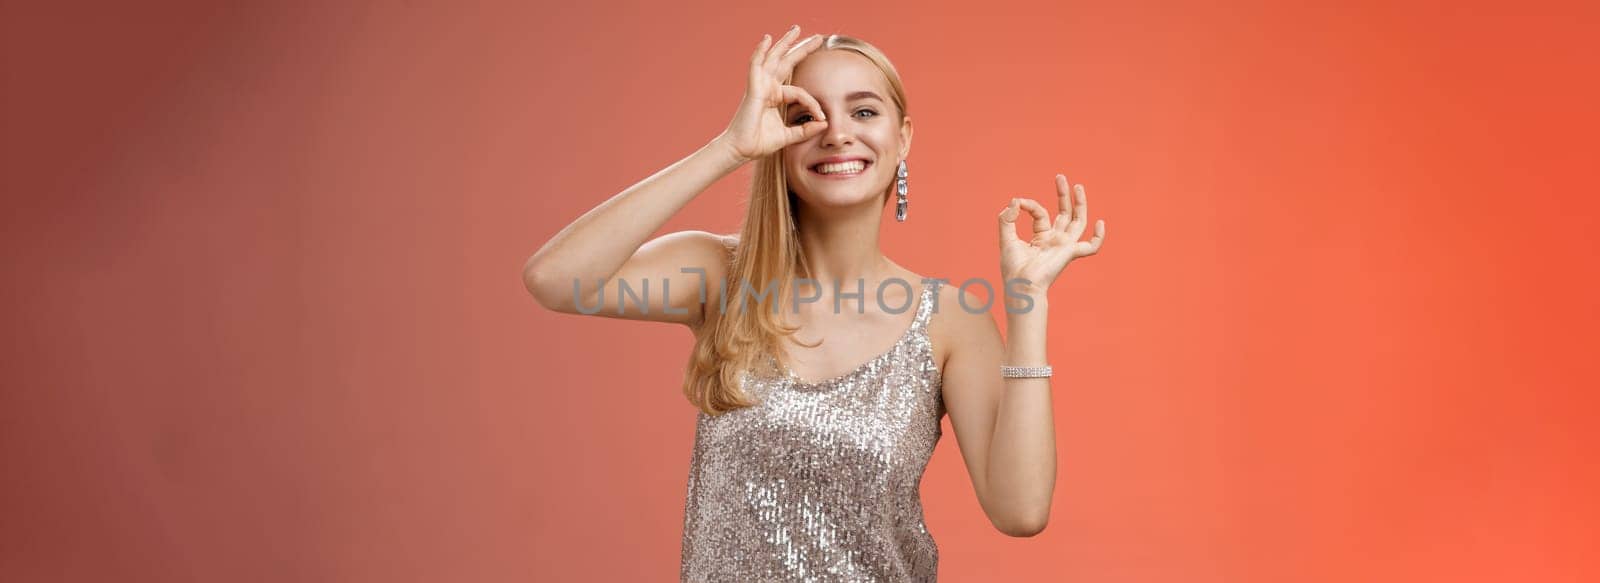 Charming funny tender feminine blond girlfriend dancing having fun enjoying perfect party smiling broadly show okay ok excellent gesture like new dress grinning satisfactory, red background.